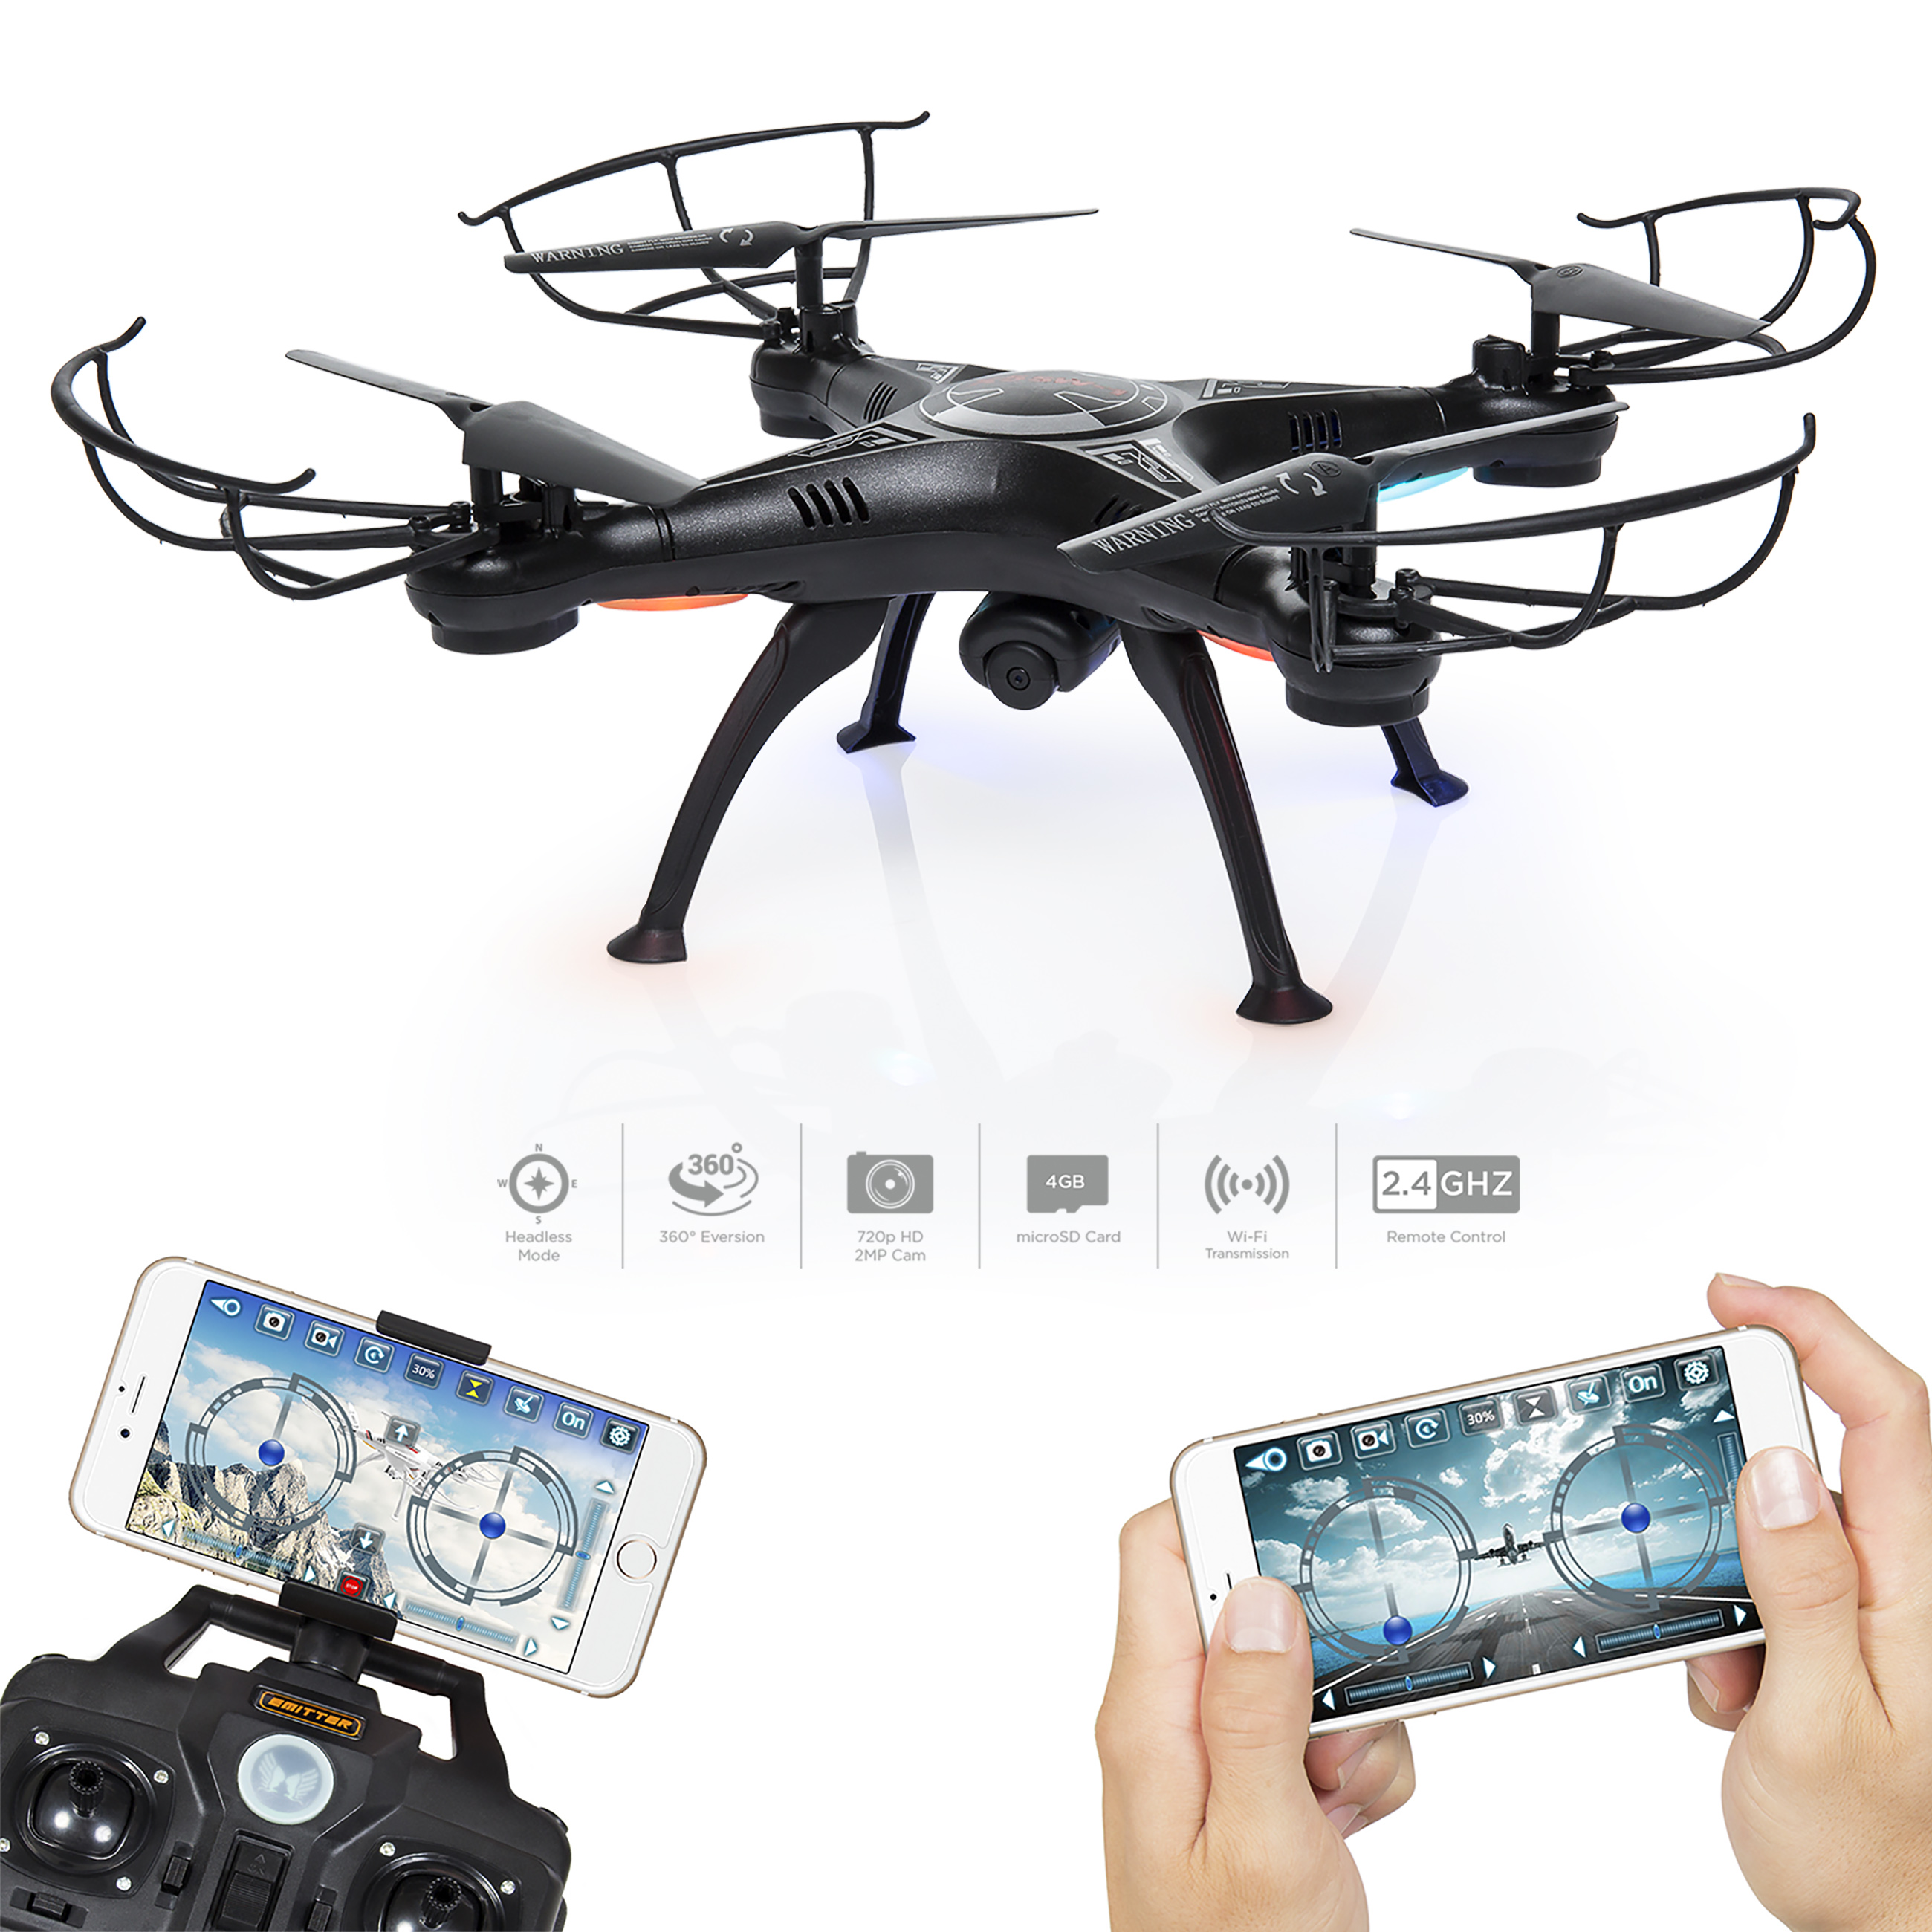 Best Choice Products 6-Axis Headless RC Quadcopter FPV RC Drone w/ WiFi HD Camera, Real Time Video, Altitude Hold - image 2 of 6